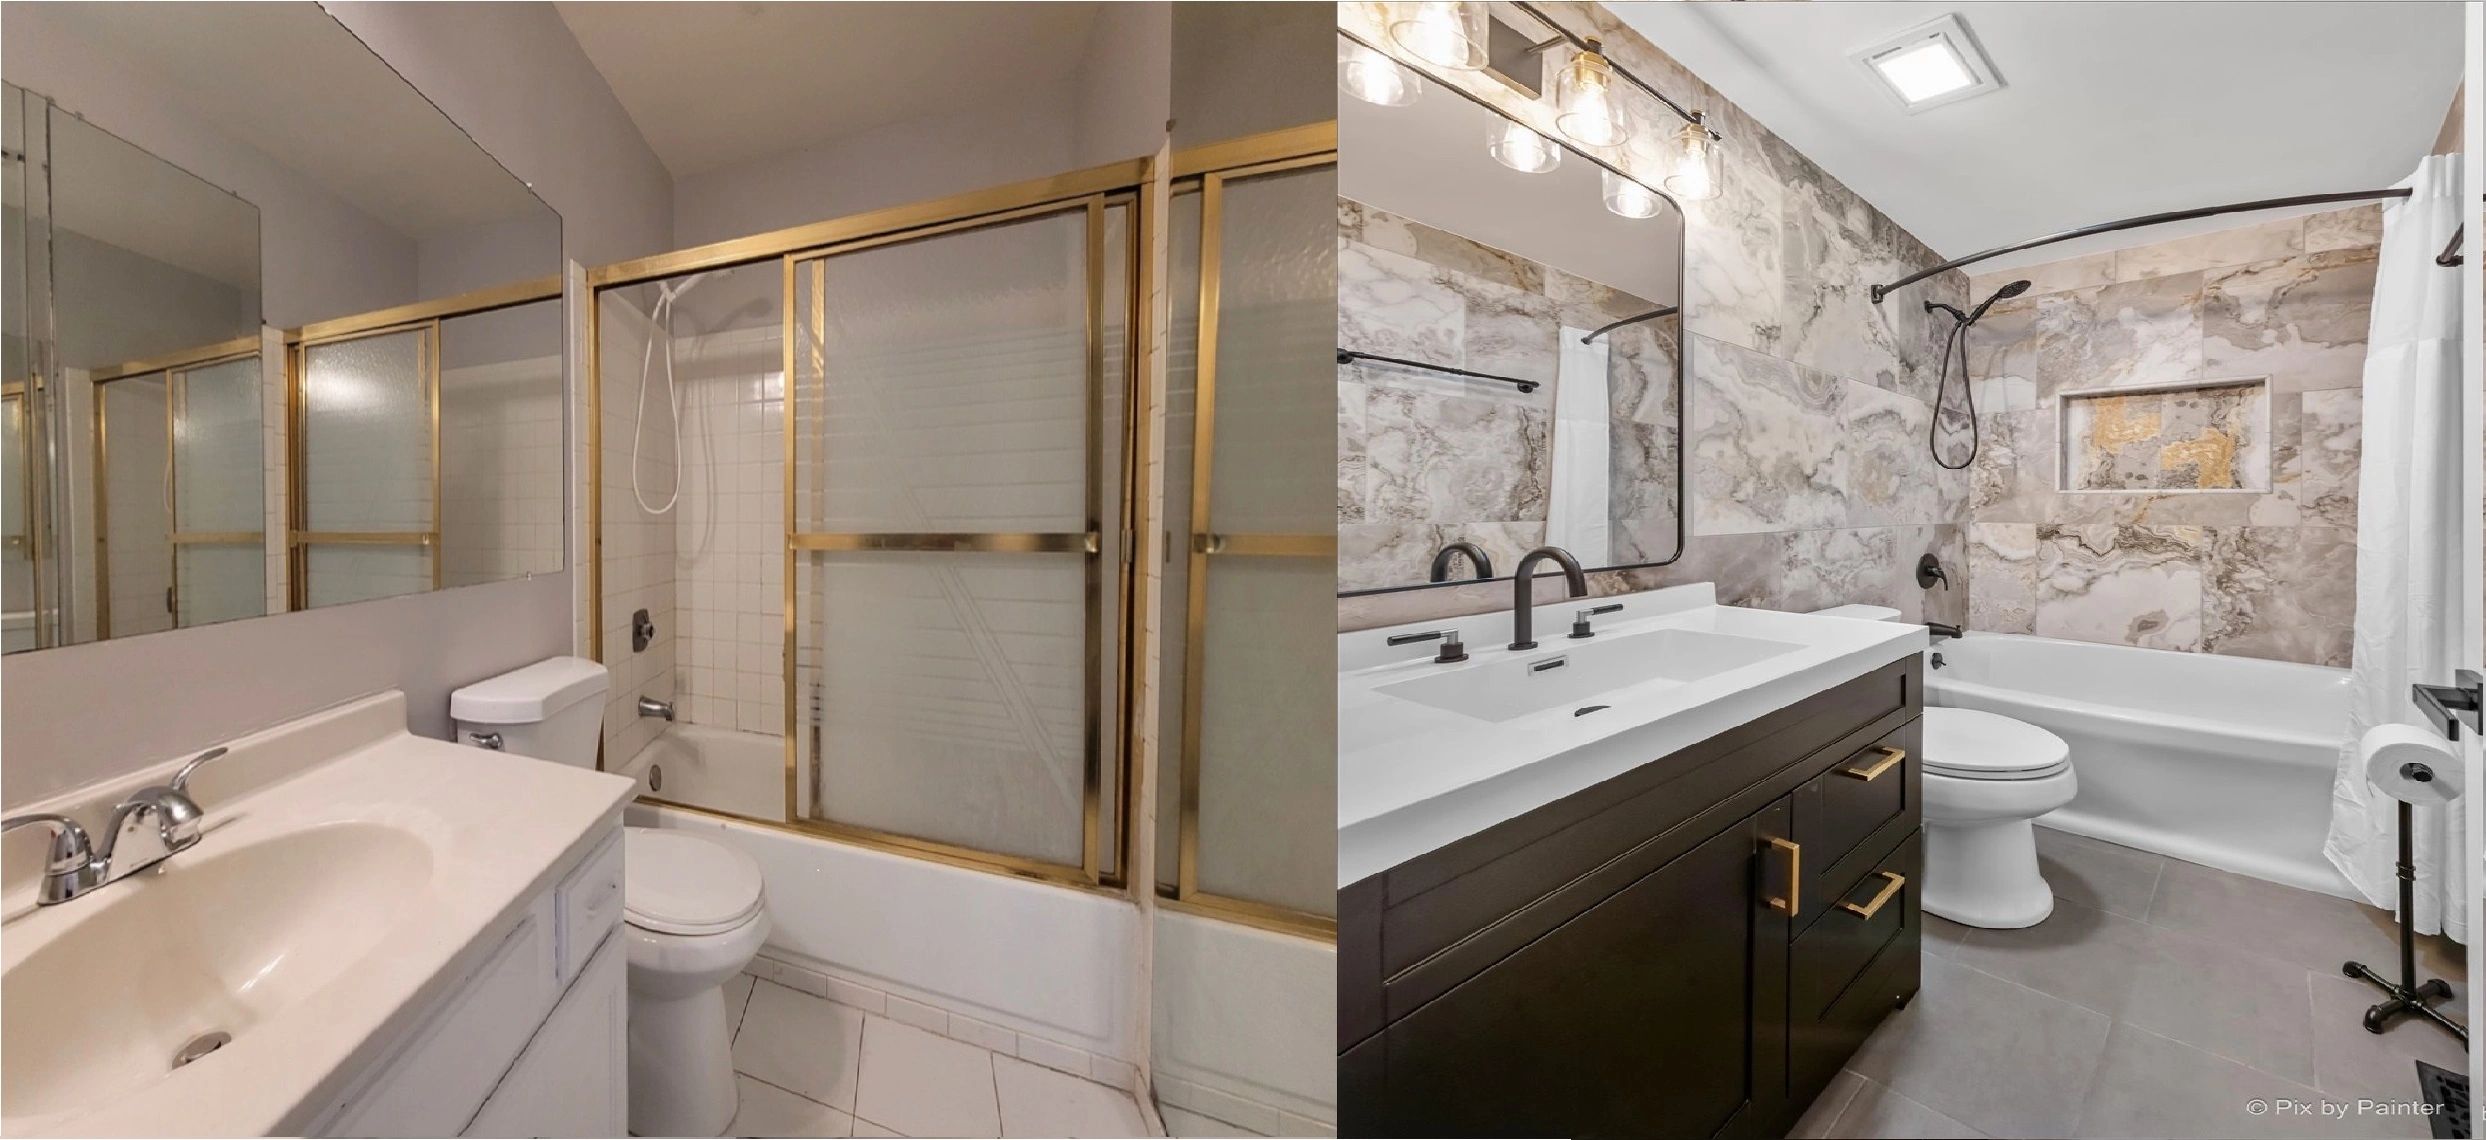 Bathroom remodel - black, gold, white, large tile on walls and floor, before and after